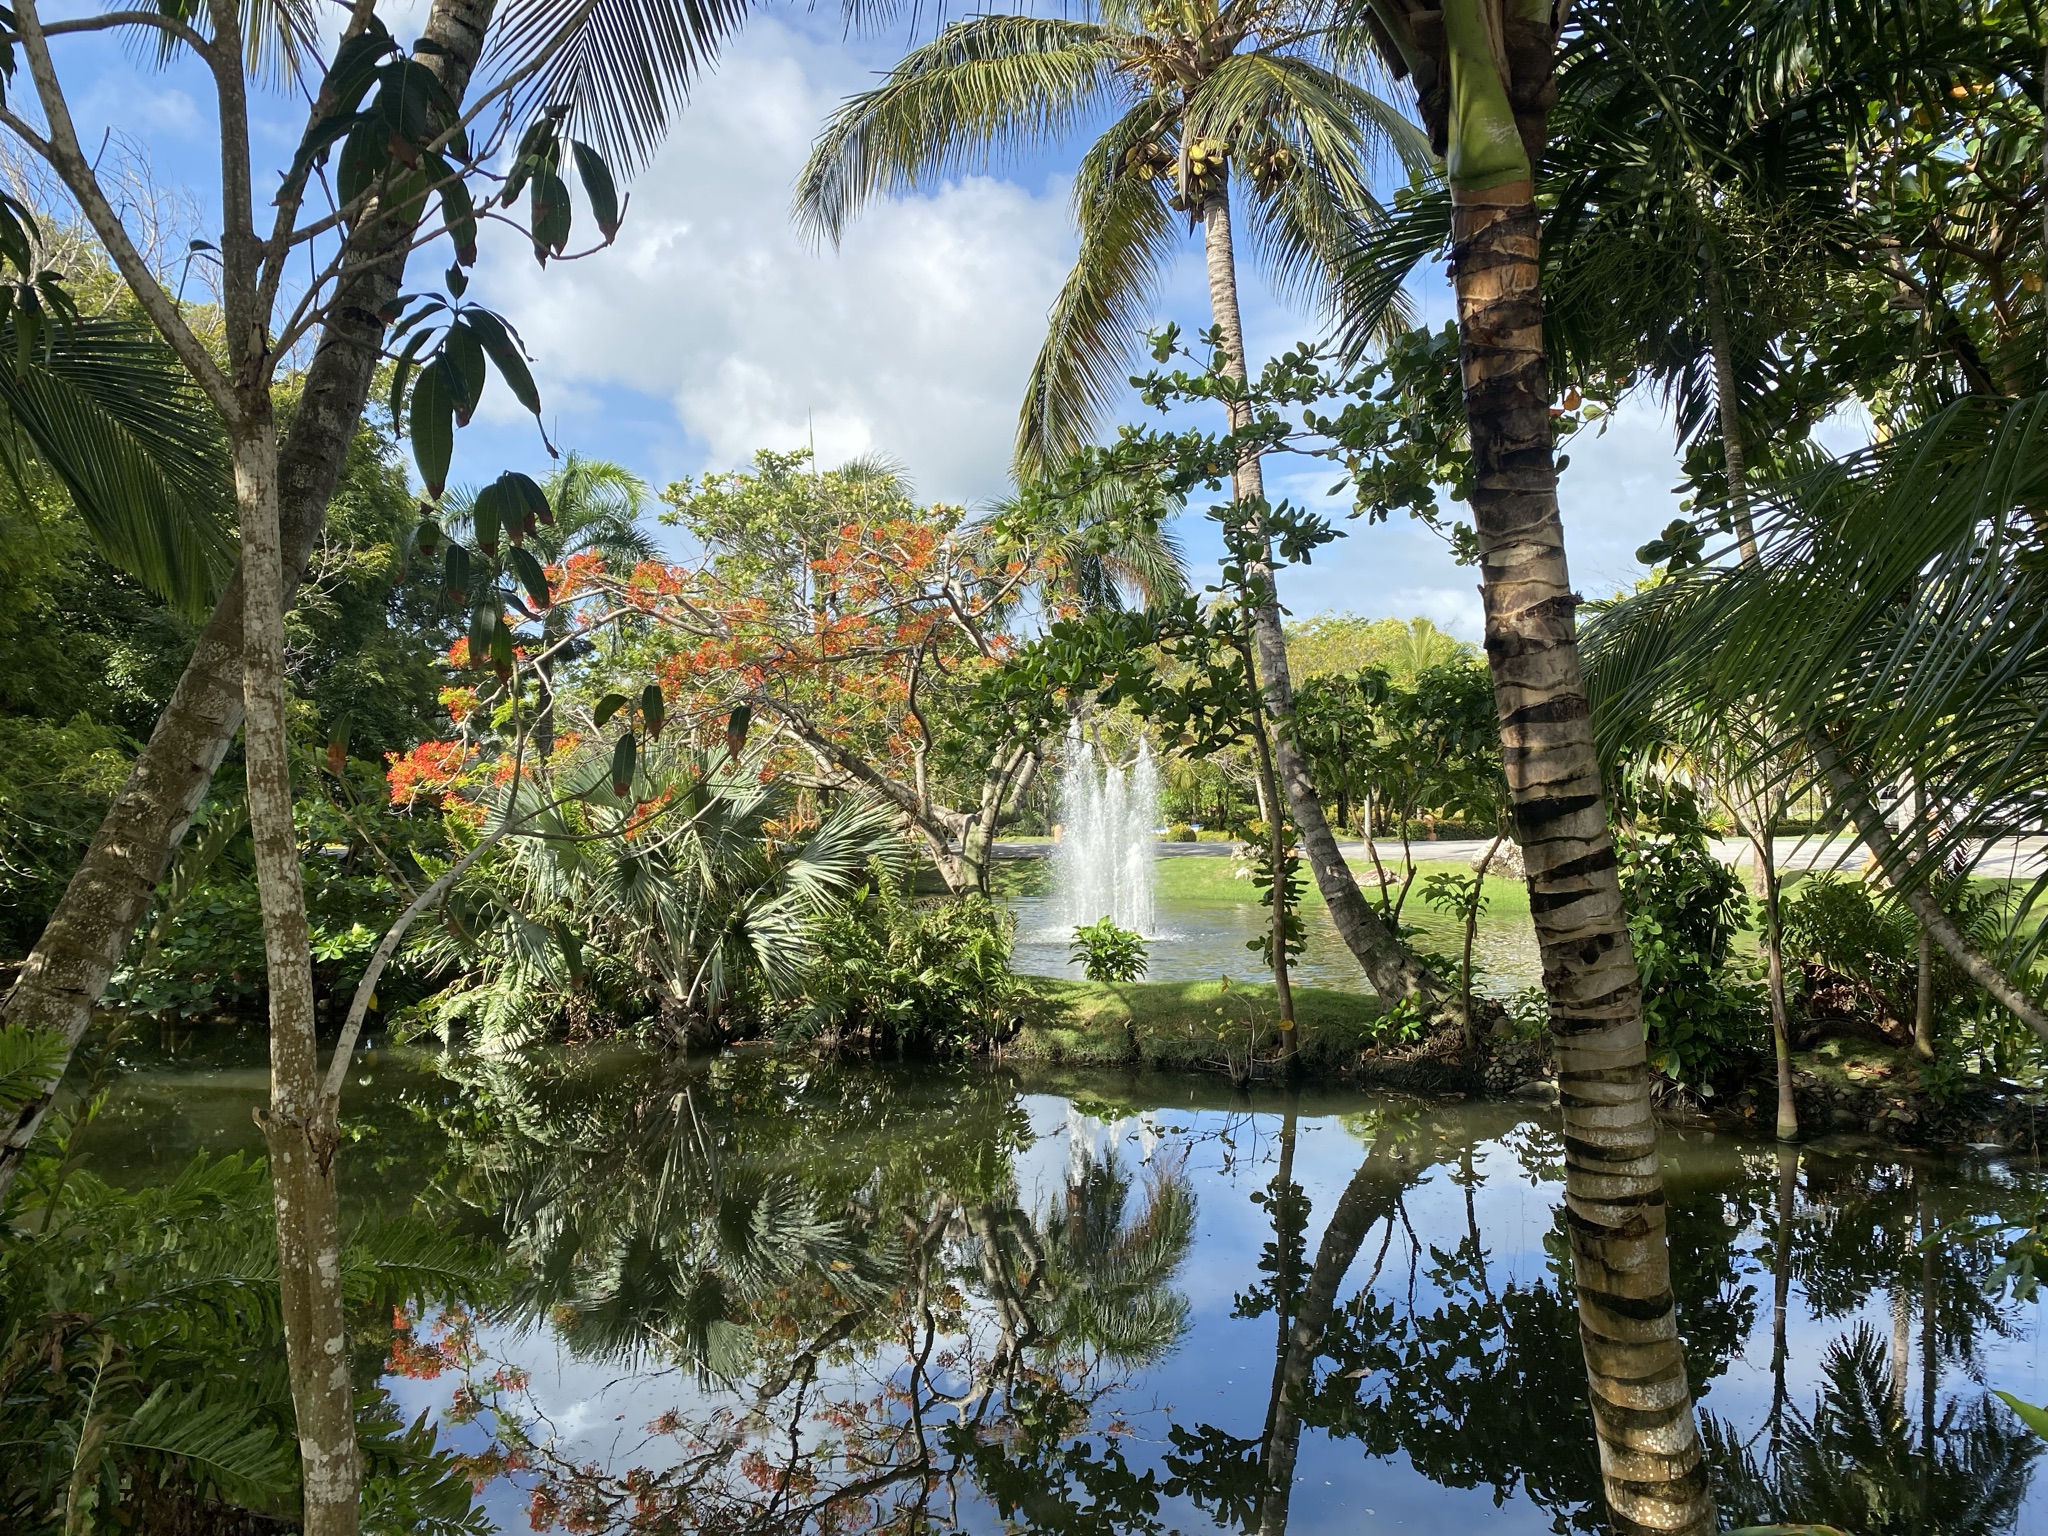 A beautiful ecological park with many tropical trees and plants